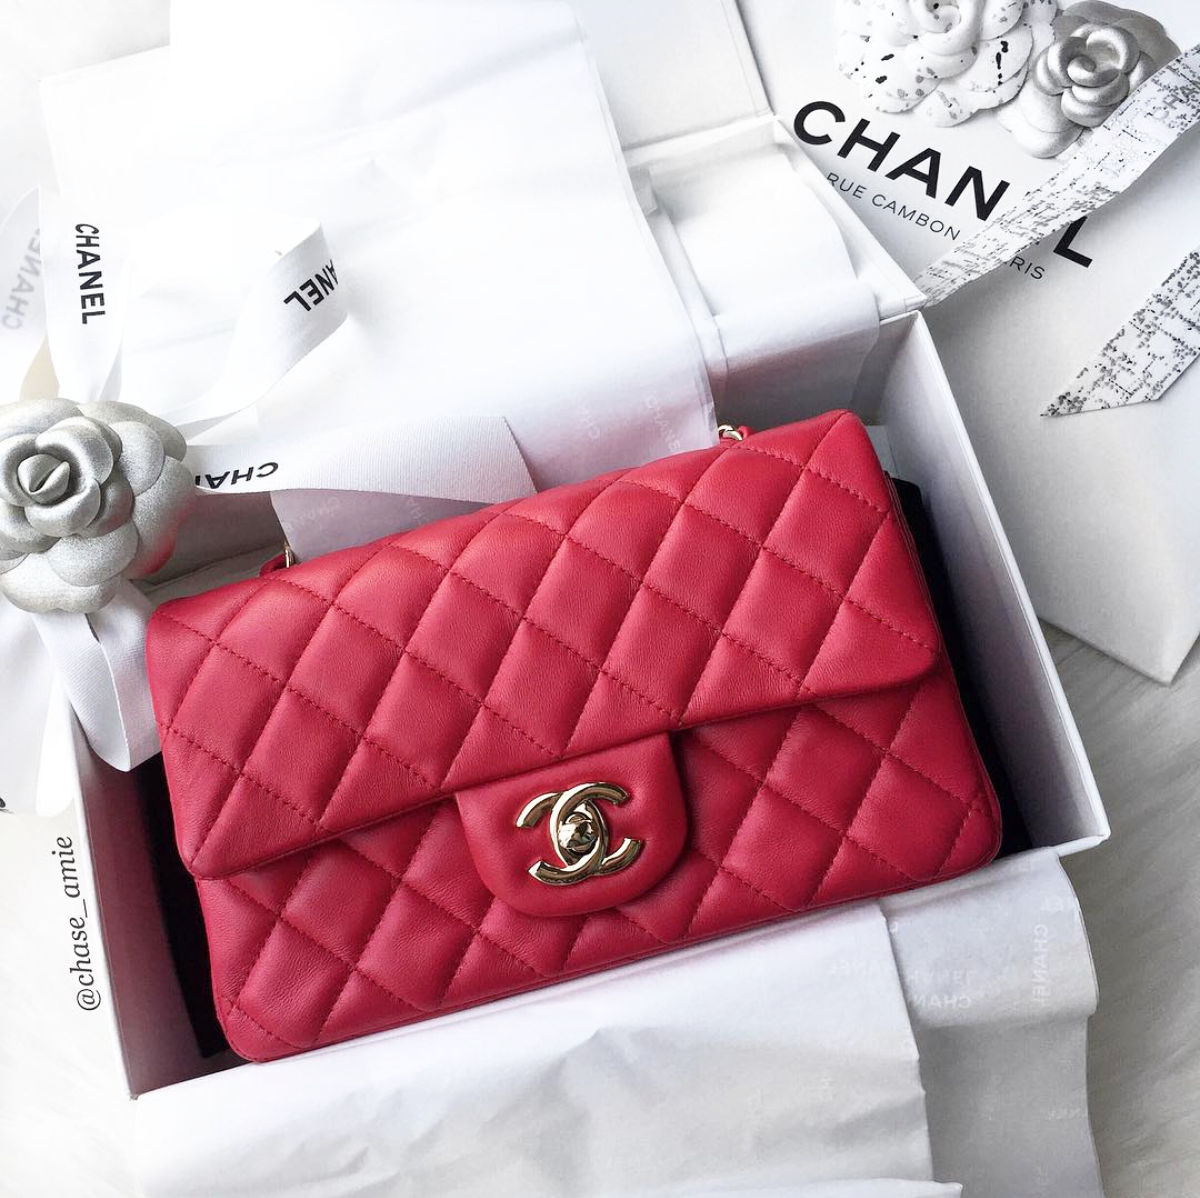 The Best Luxury Brands To Invest In (Which Aren't Chanel) - Chase Amie